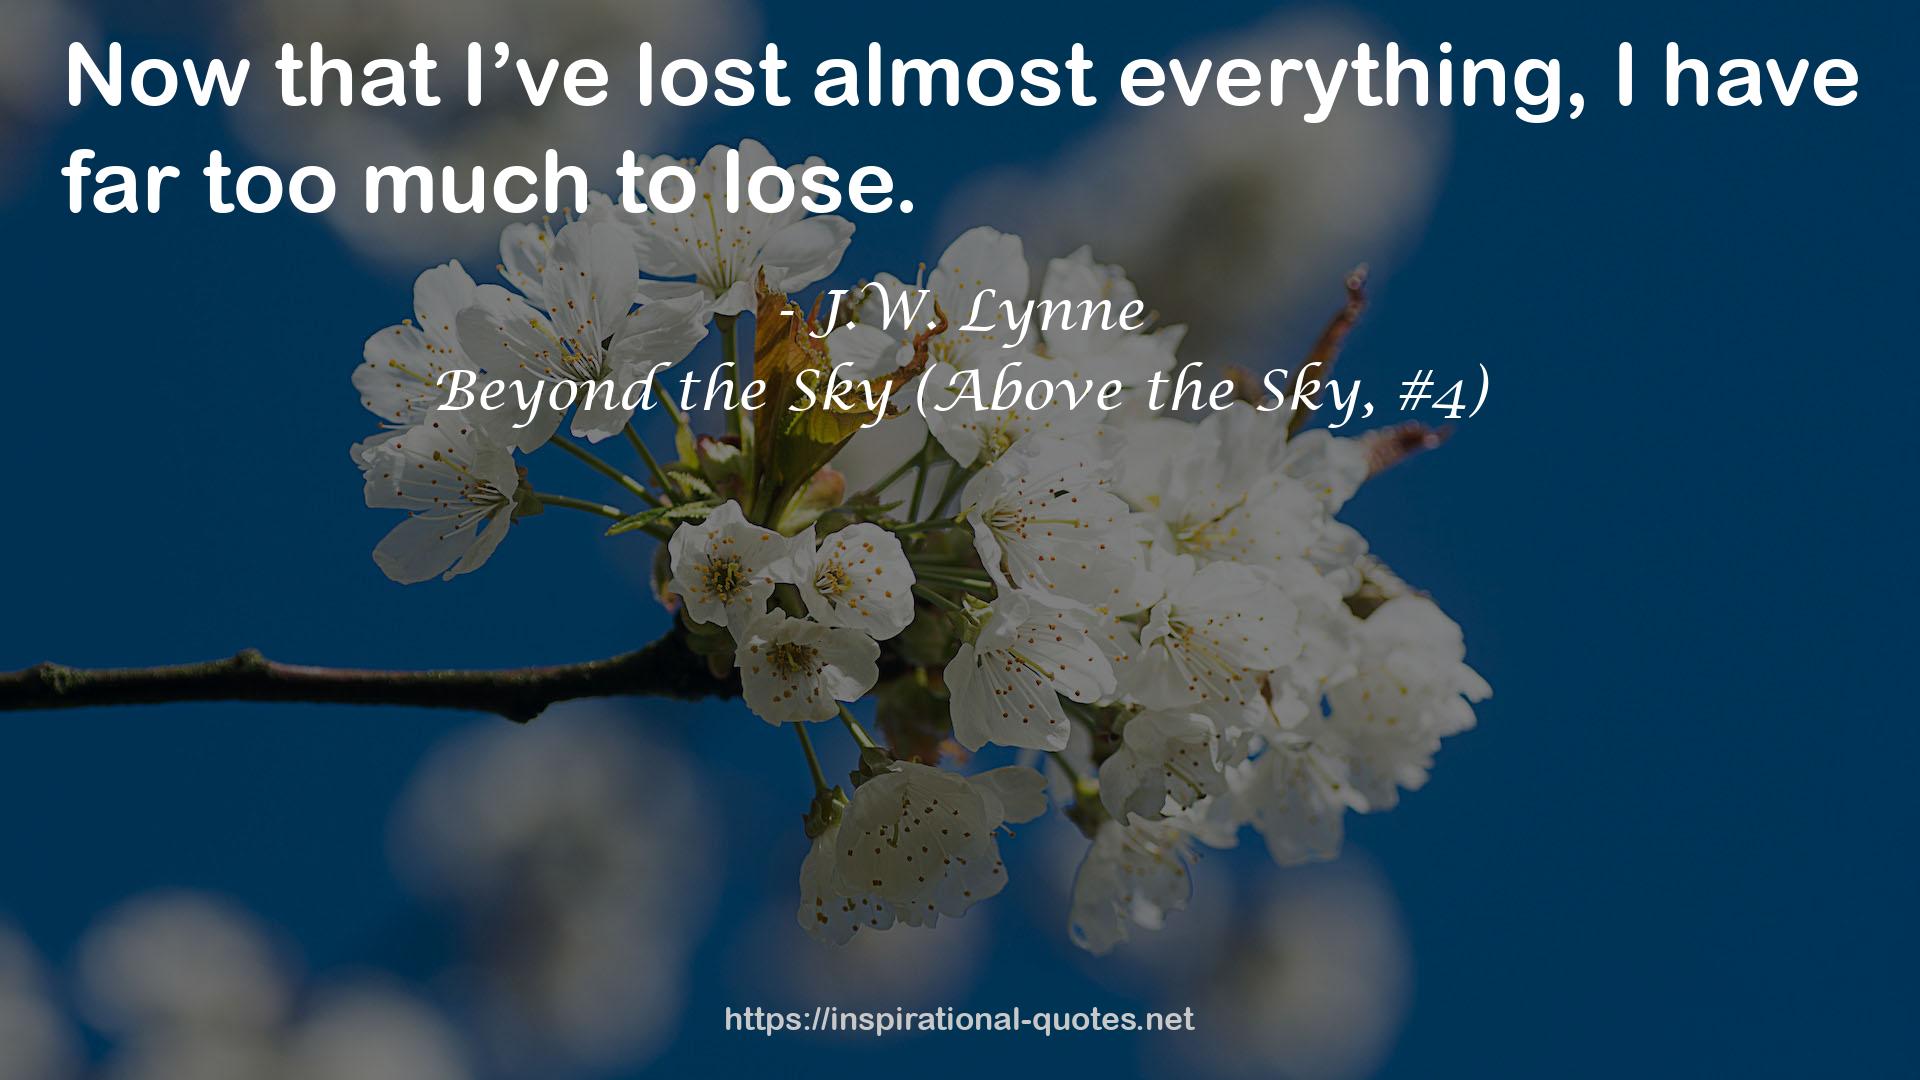 Beyond the Sky (Above the Sky, #4) QUOTES